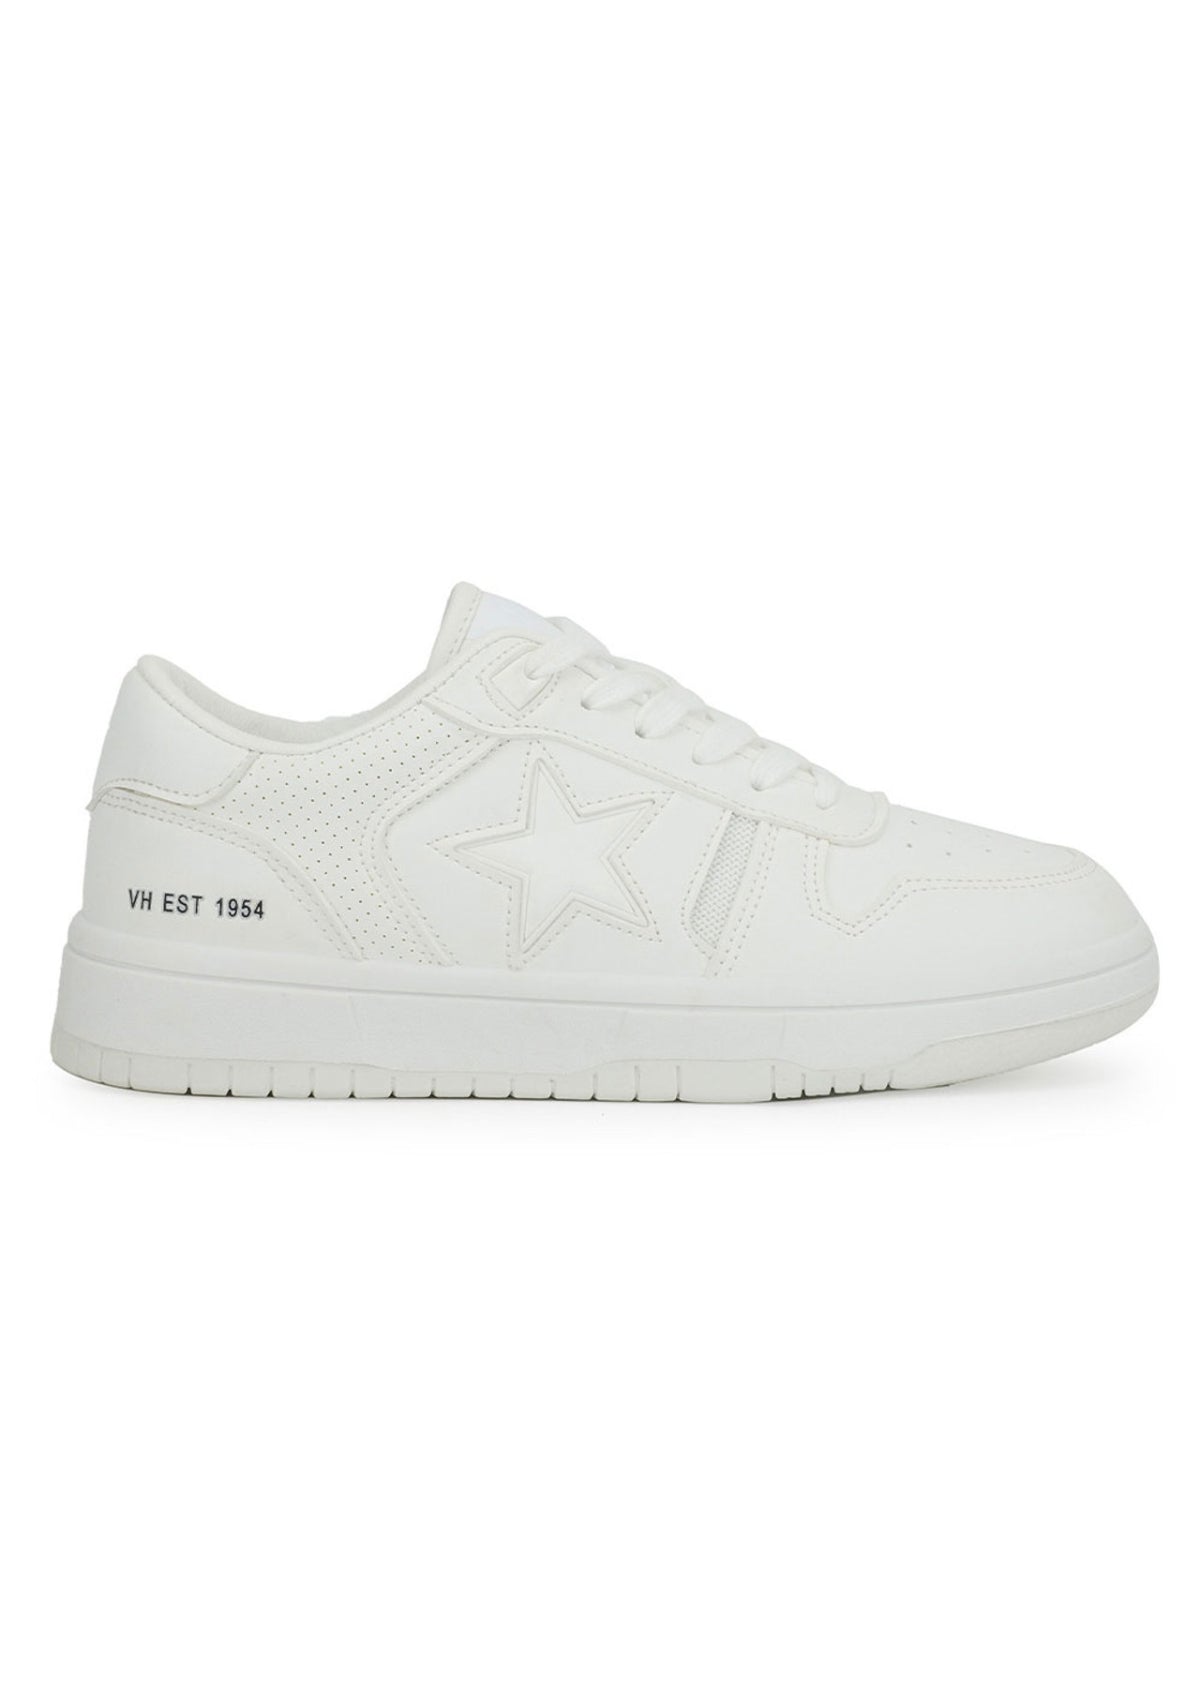 All White Dotted Embedded White Star Sneakers -Vintage Havana / Ocean Drive Inc.- Ruby Jane-